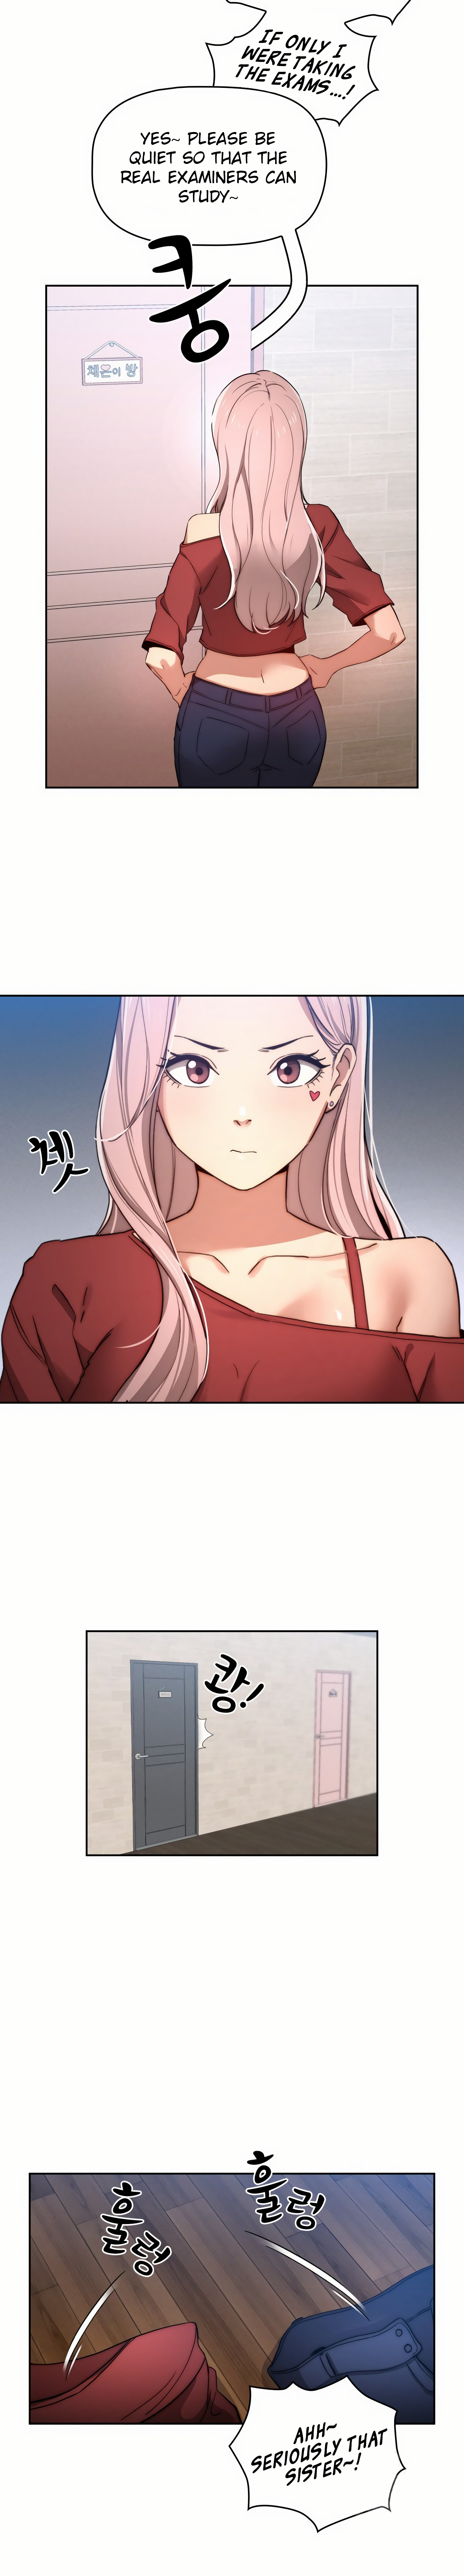 private-tutoring-in-these-difficult-times-chap-34-5